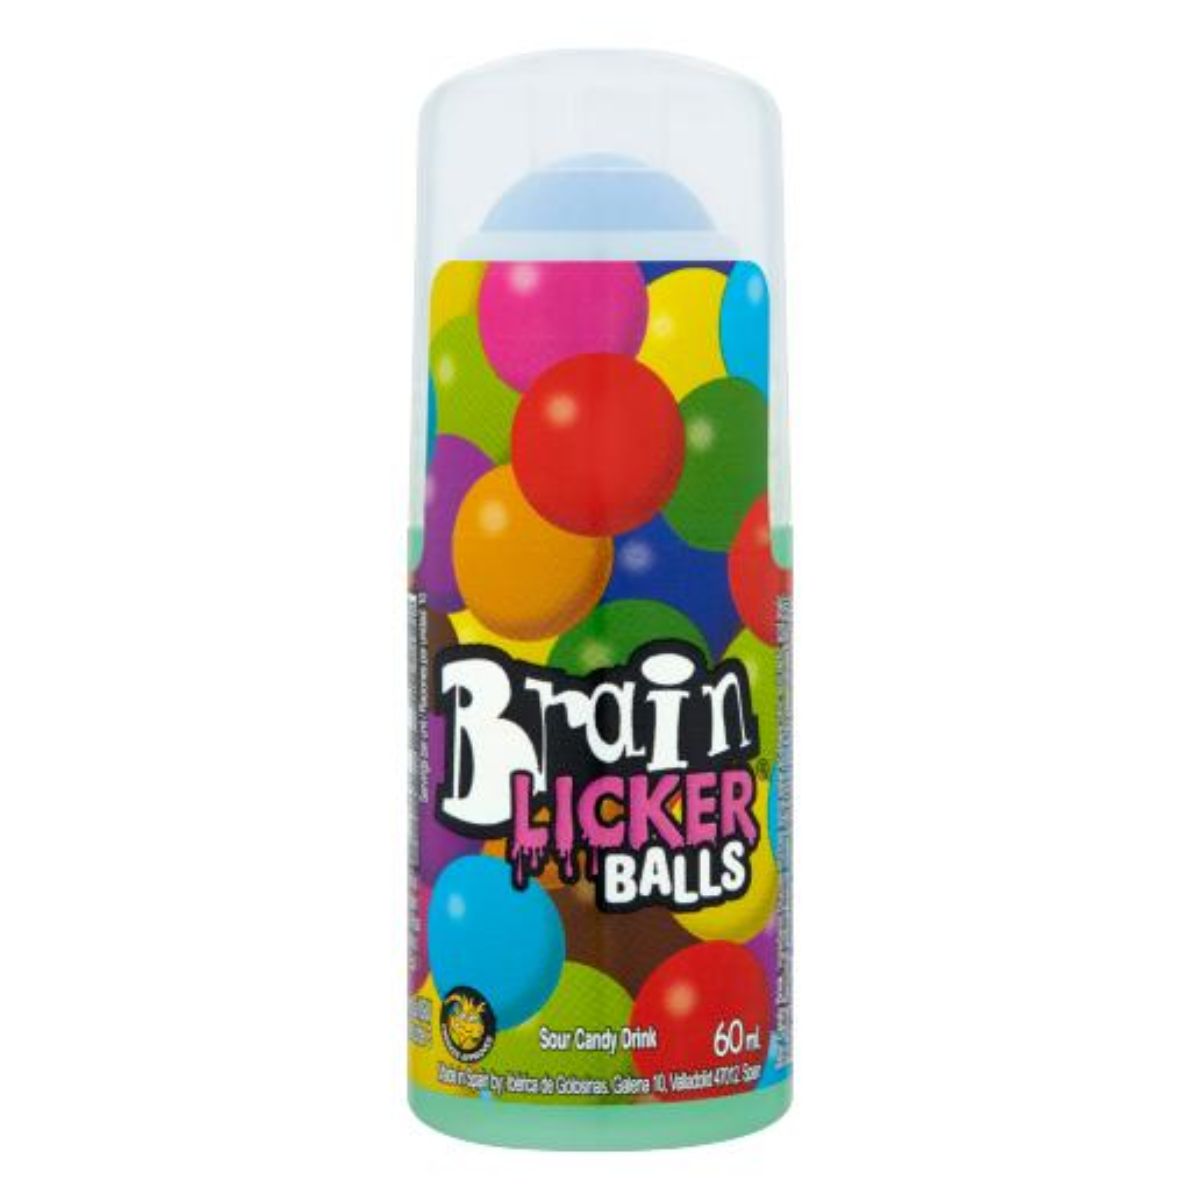 A bottle of Brain Licker - Balls Sour Candy Drink - 60ml on a white background.